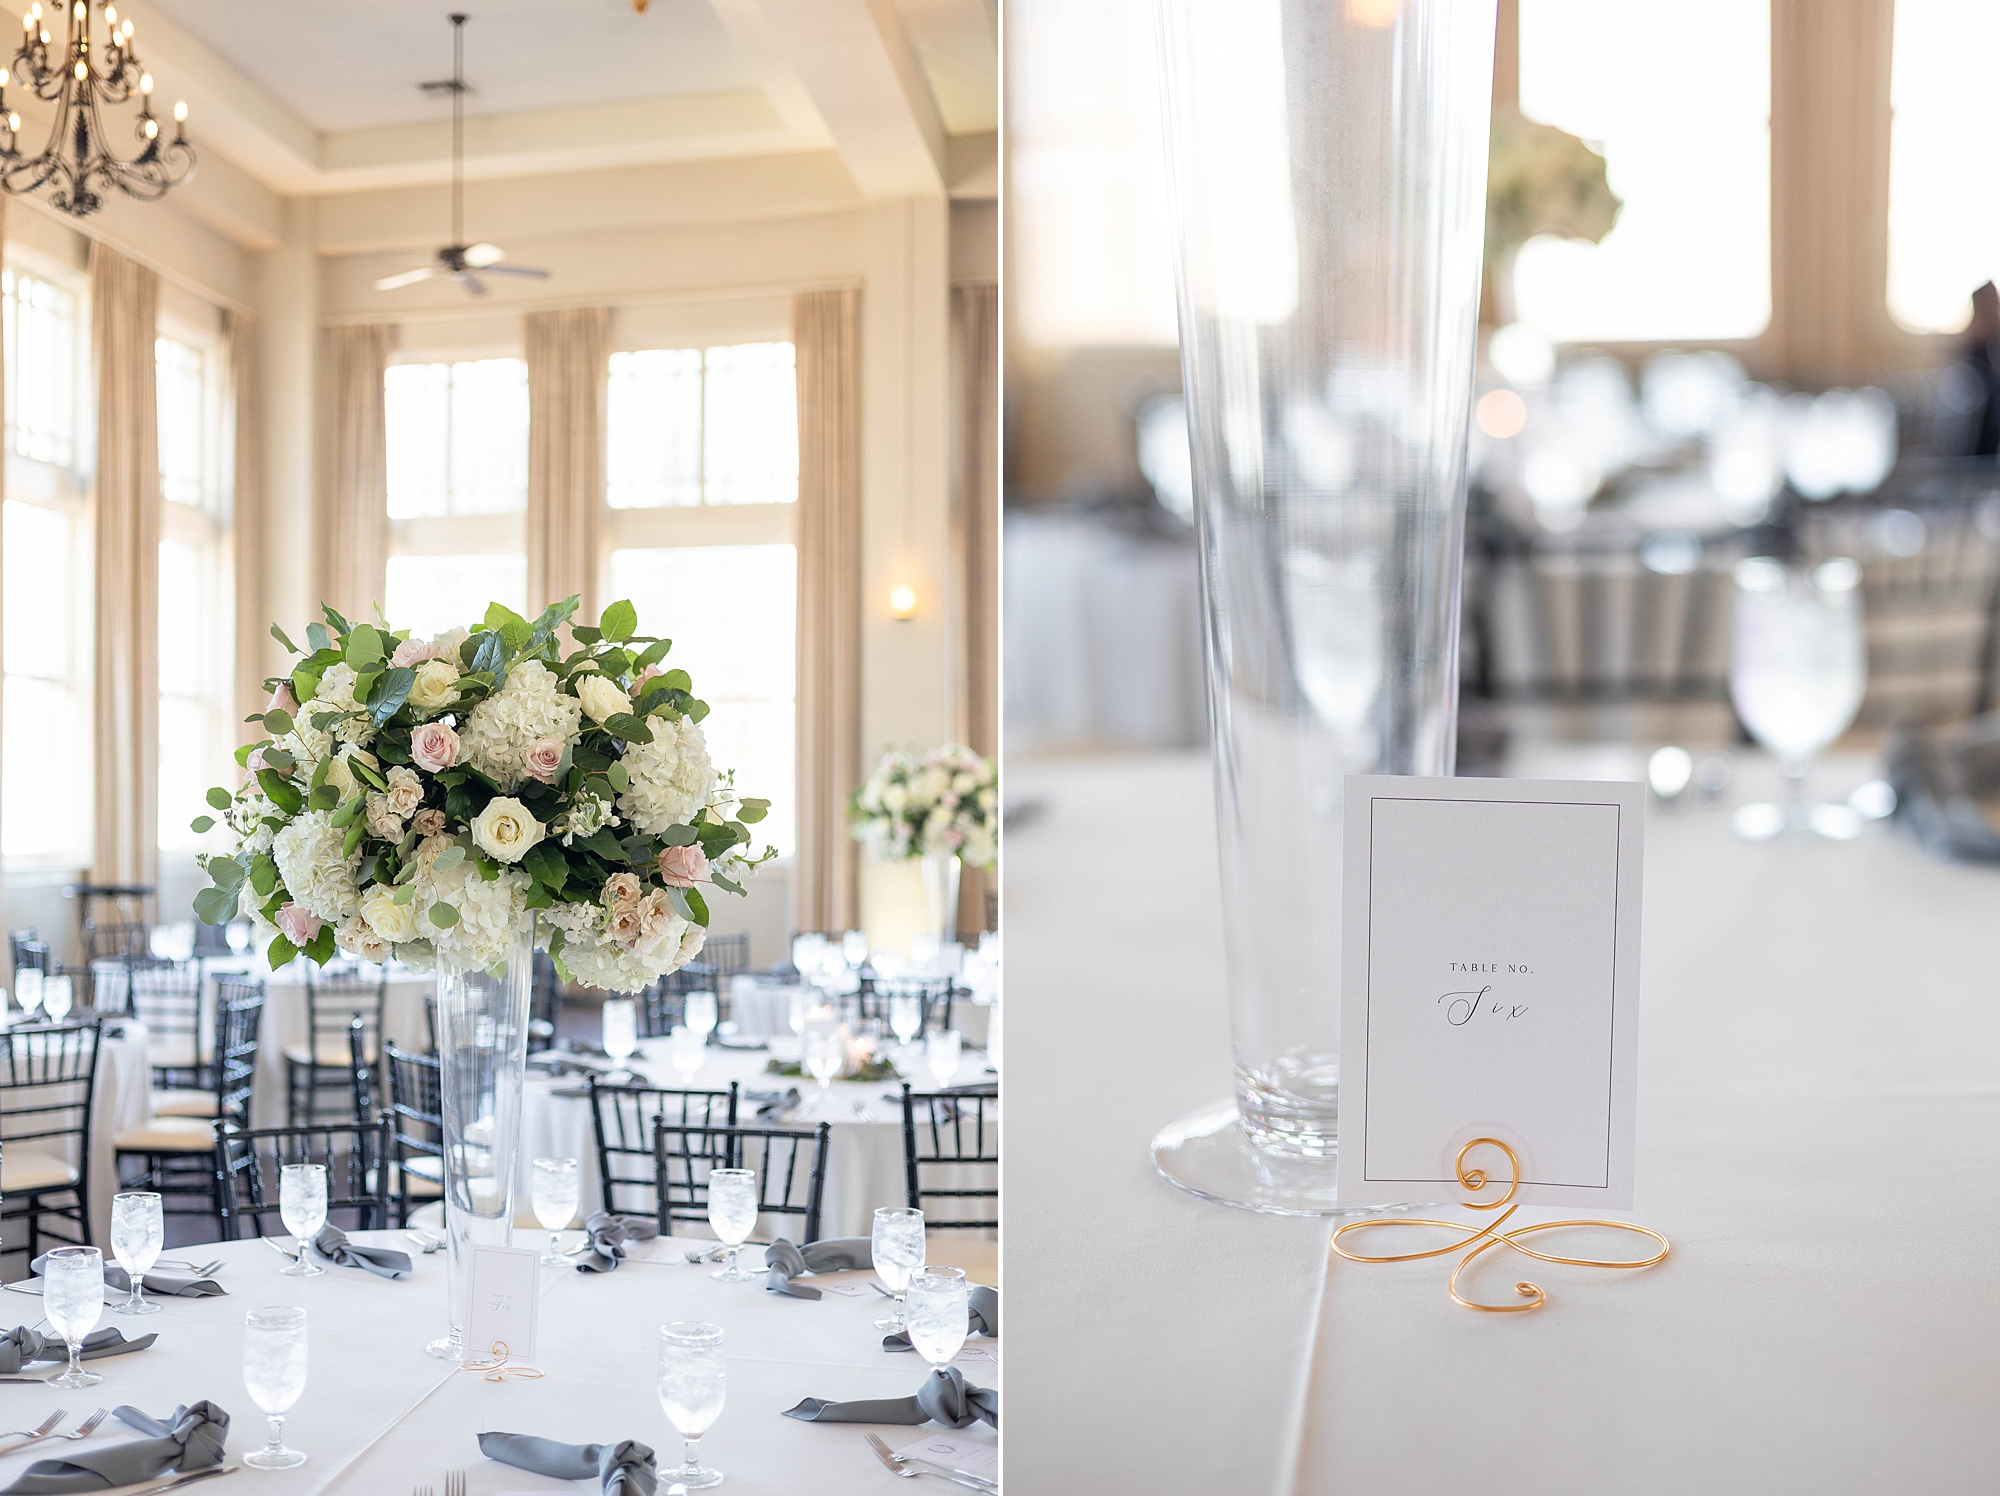 tall floral centerpieces with pastel pink and white flowers for wedding reception at the Room on Main